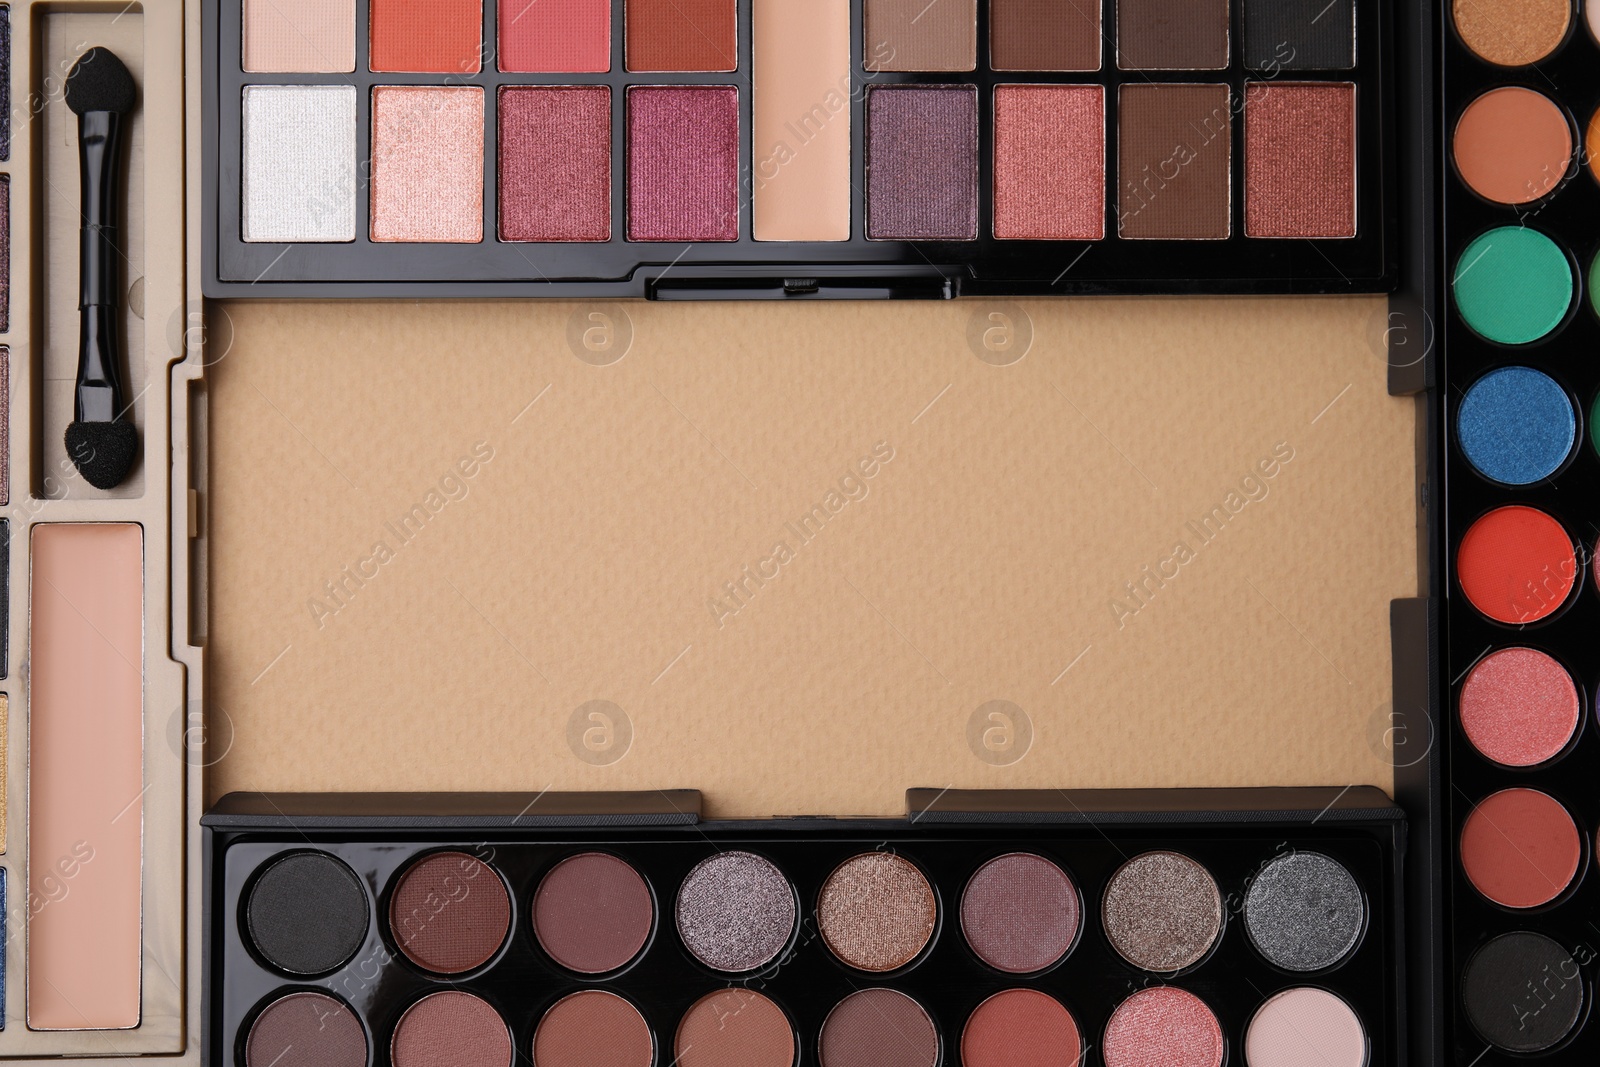 Photo of Frame made of beautiful eye shadow palettes on beige background, flat lay. Space for text